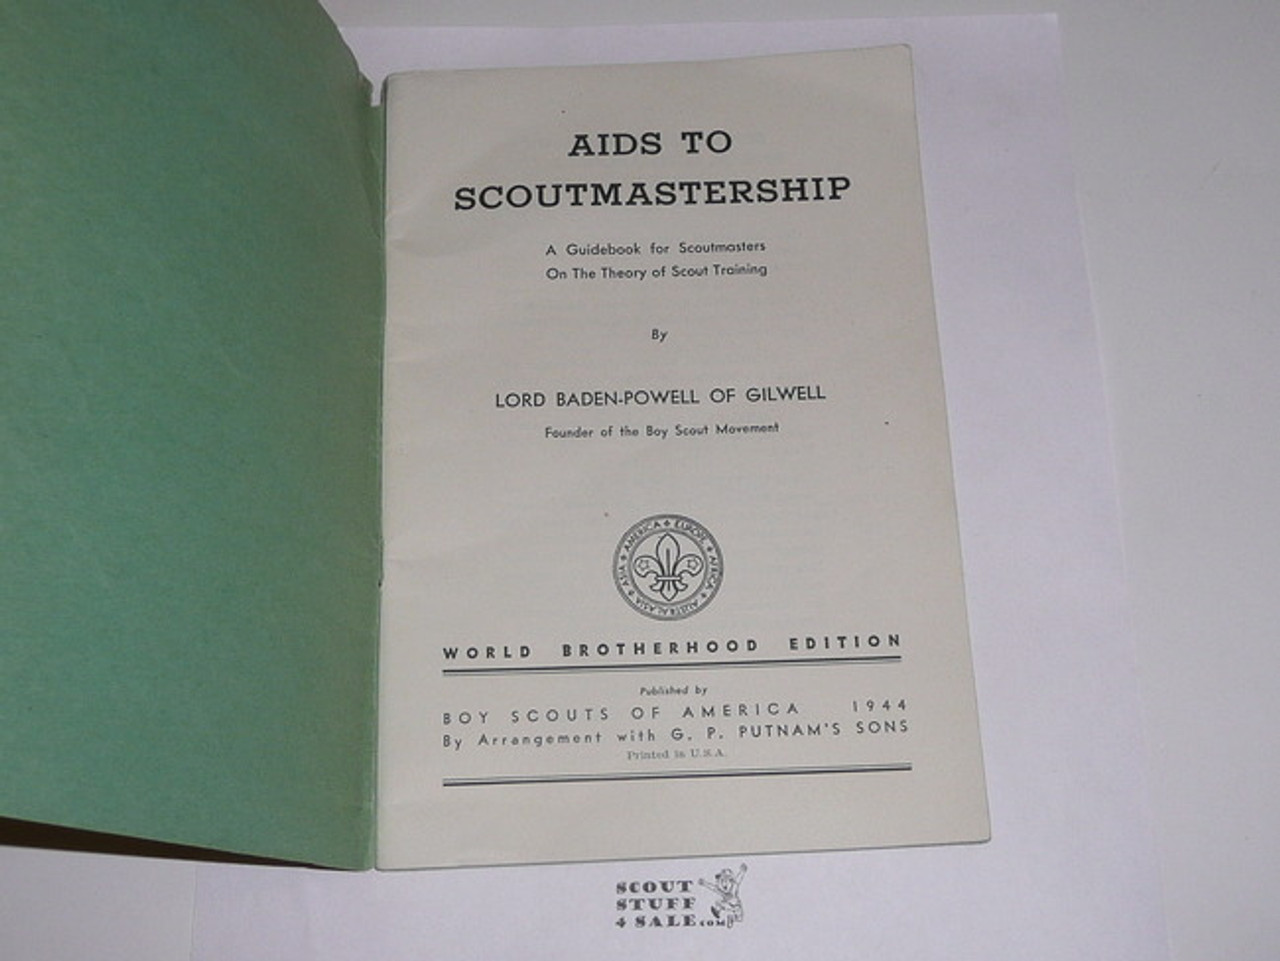 1944 Aids to Scoutmastership, By Lord Baden-Powell, World Brotherhood Edition